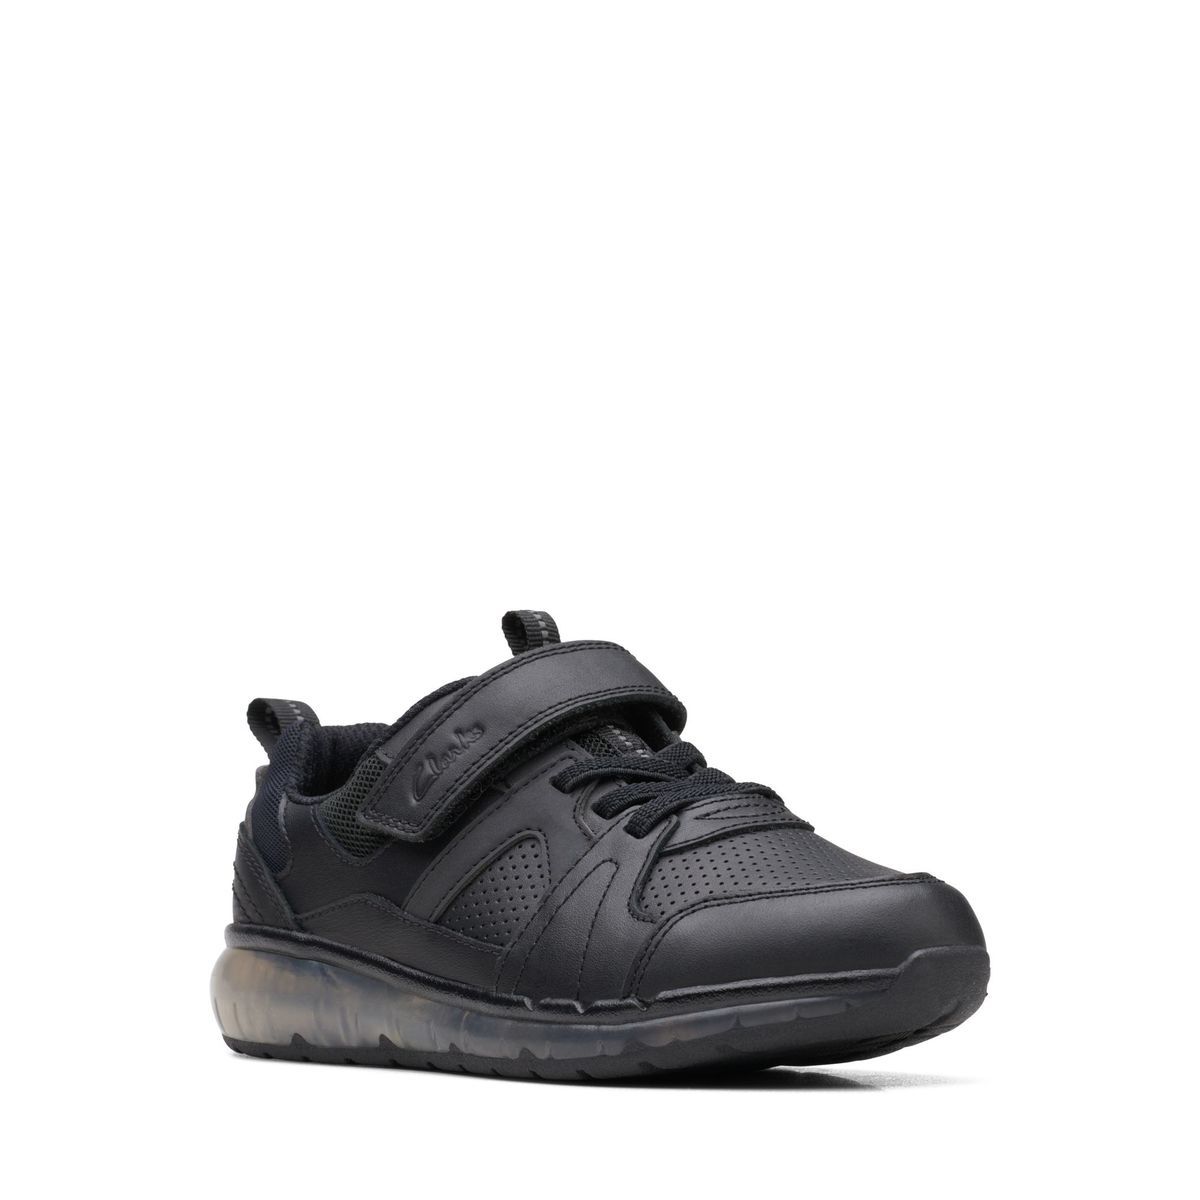 Clarks Spark Beam K Black Leather Kids Boys Trainers 679226F In Size 10.5 In Plain Black Leather F Width Fitting Regular Fit For School For kids